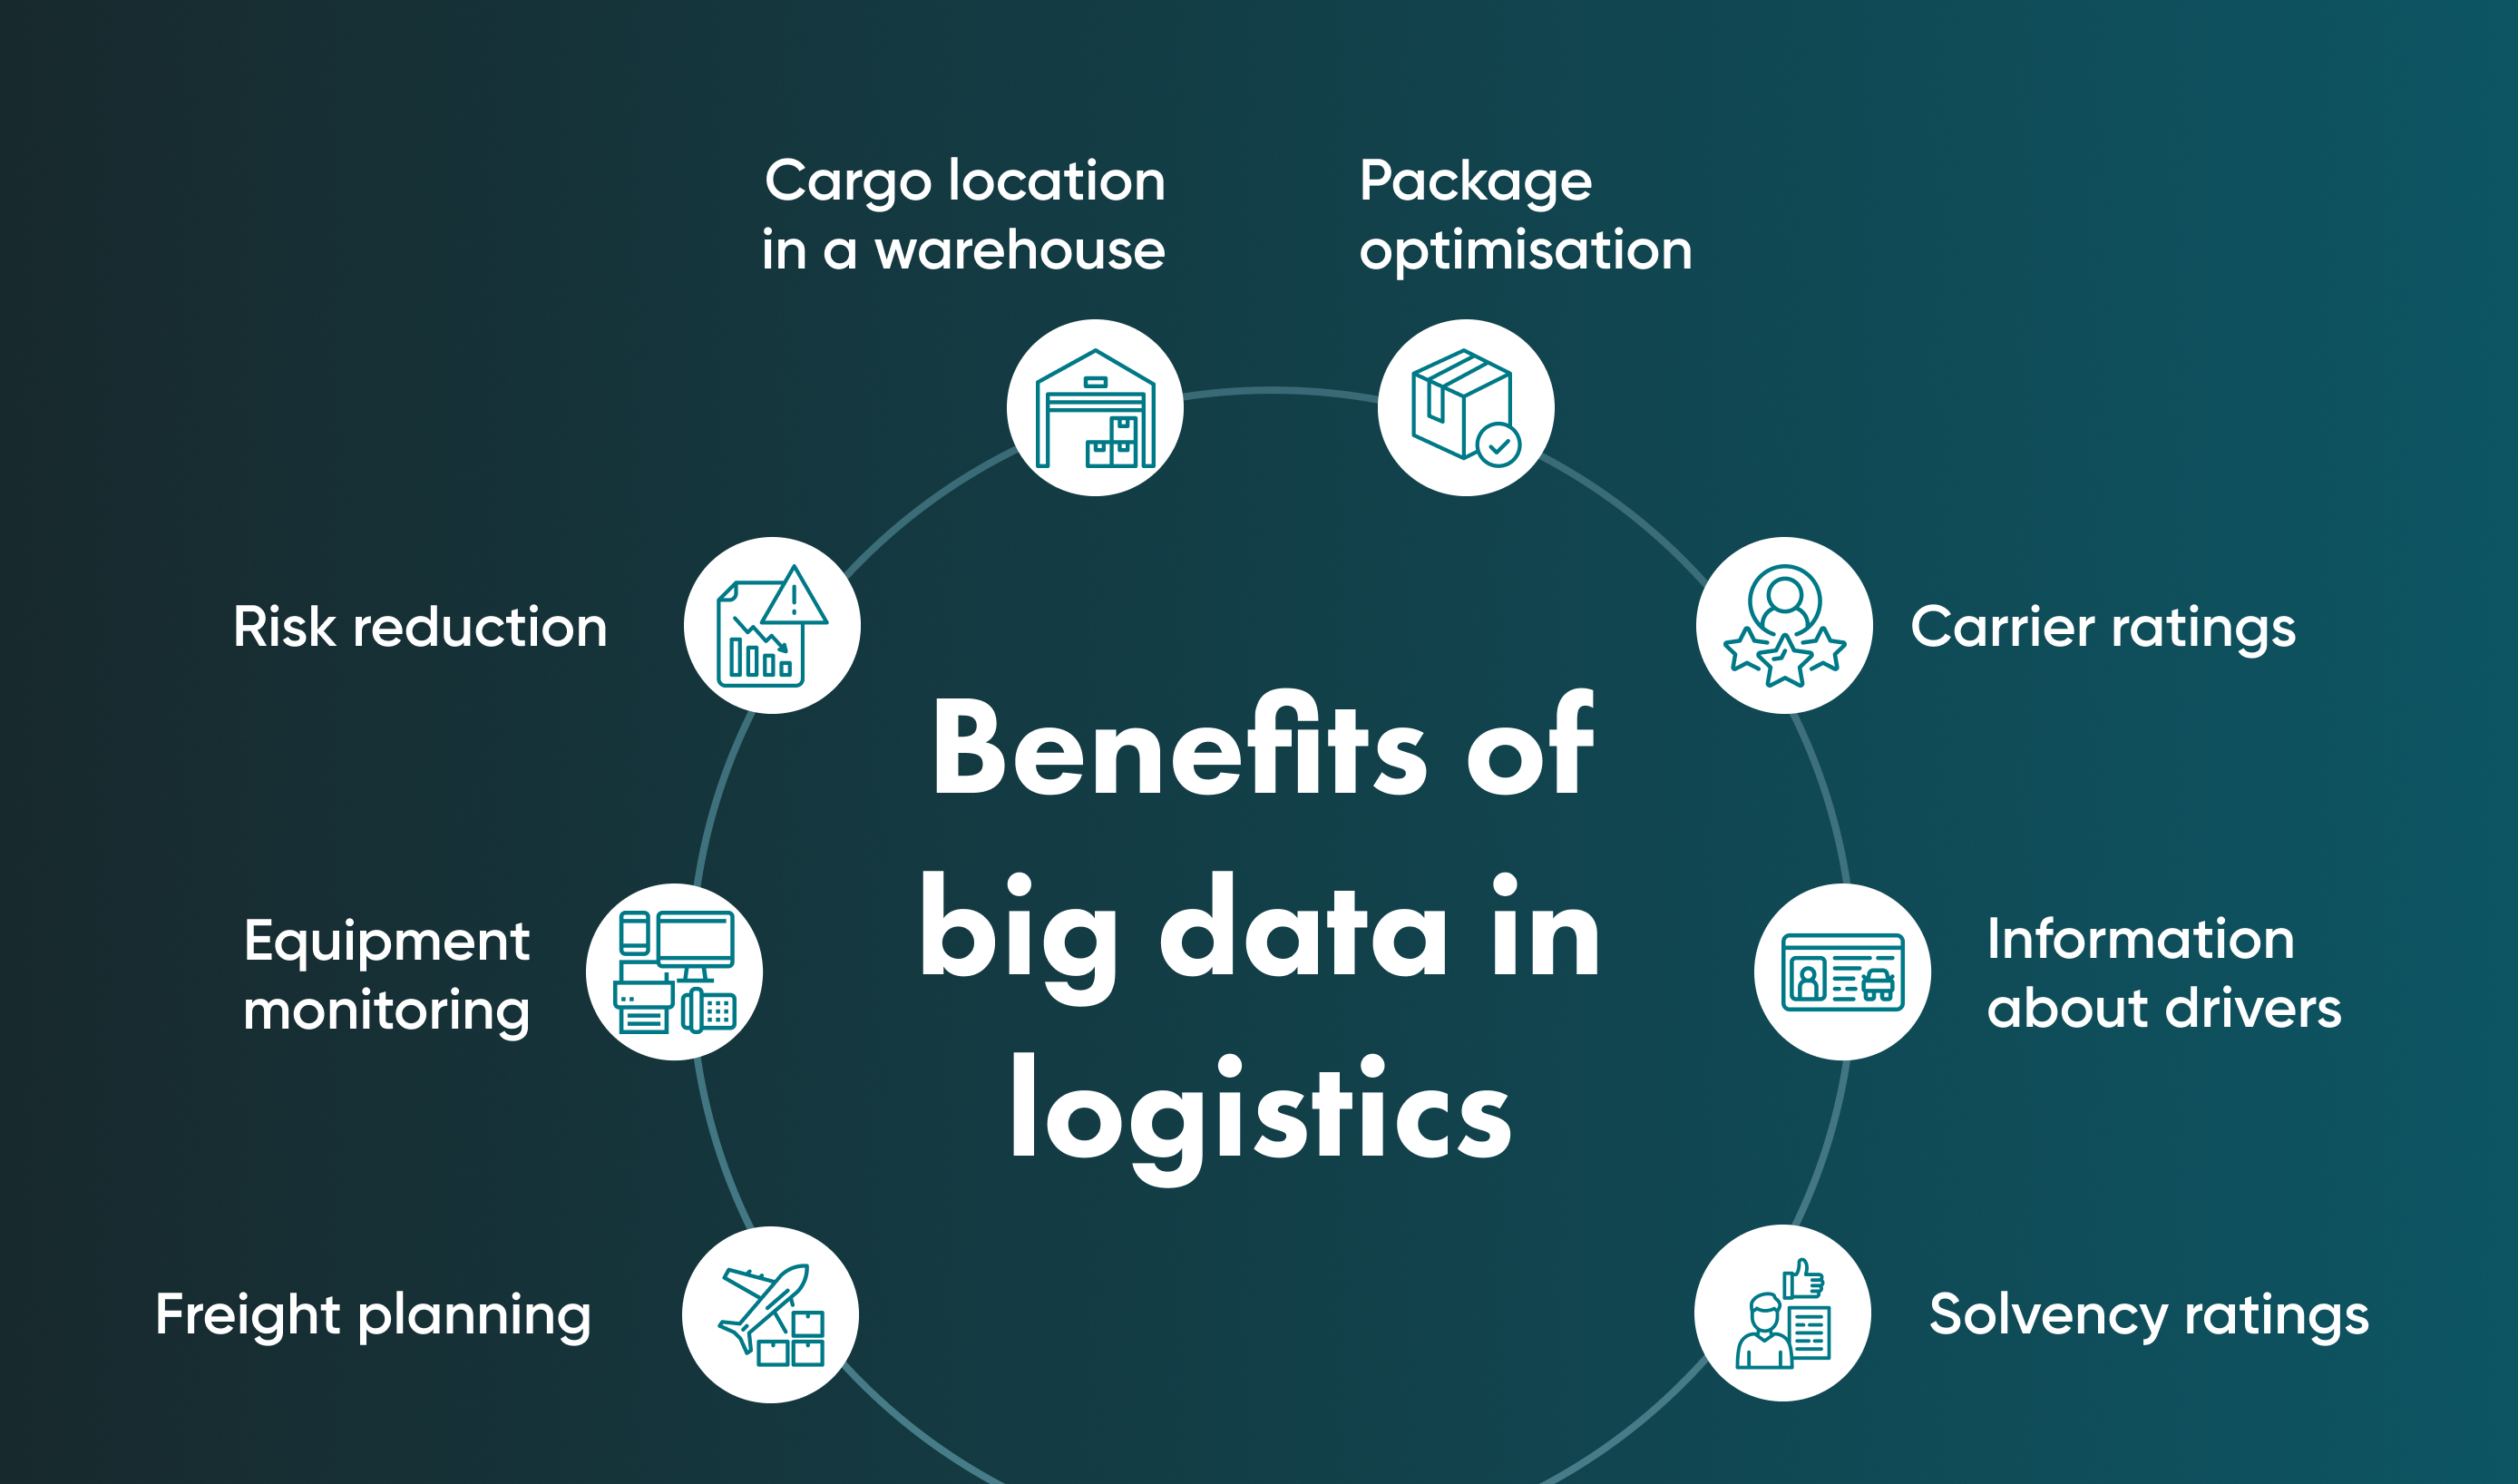 Companies may use all the benefits of big data in transportation and logistics if they want to grow and improve their business. 